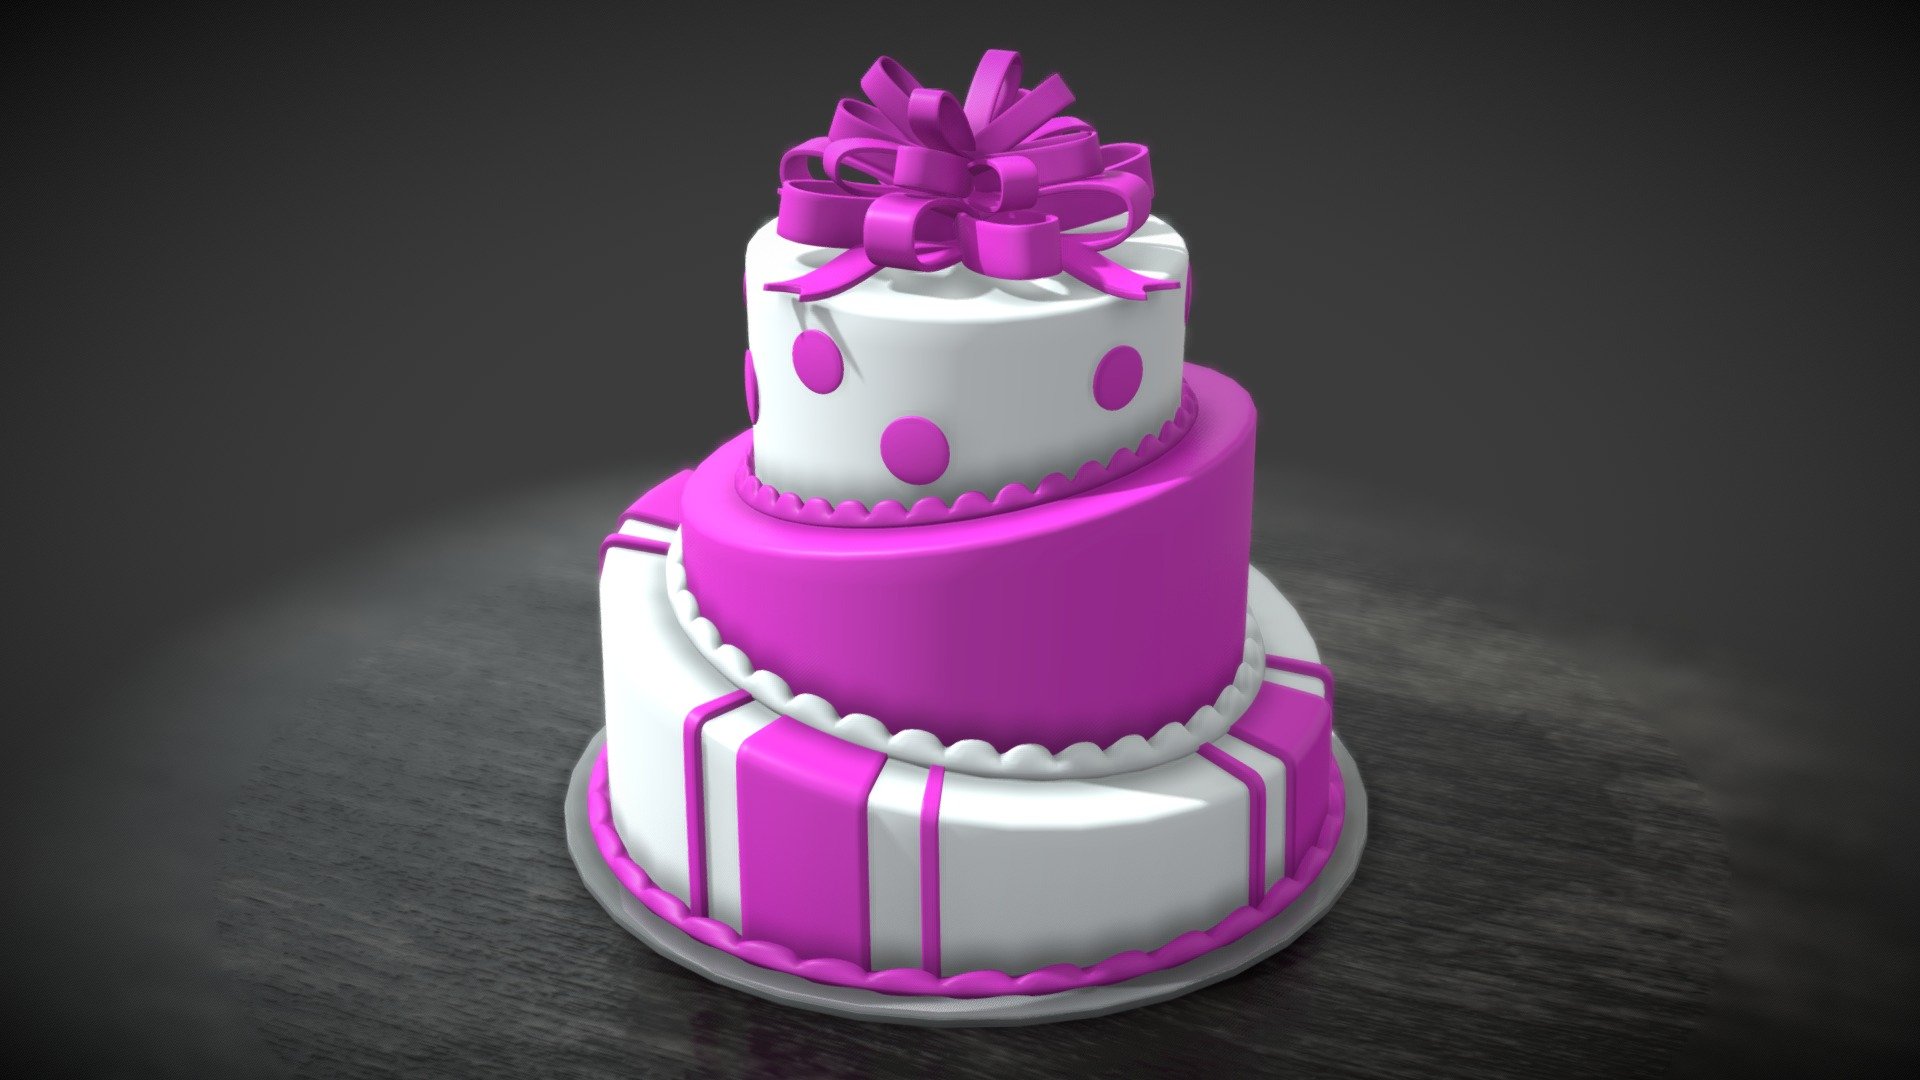 Cake Three Layers 3D Model Created In 3DS Max 2018.

All Formats Size:  MB

Zip File Size:  MB

Available Formats: .Max (3Ds Max 2018 Default) .3ds” .bin” .Dae (Collada)” .dwf” .dwg” .fbx” .gltf” .jt” .skp (Sketchup)” .stl” .u3d” .obj+mtl”

(Polys Count: 51708 ) (Verts count: 53241 )

Your feedback and rating are important for me :) - Cake Three Layers - Buy Royalty Free 3D model by SHUBBAK3D 3d model